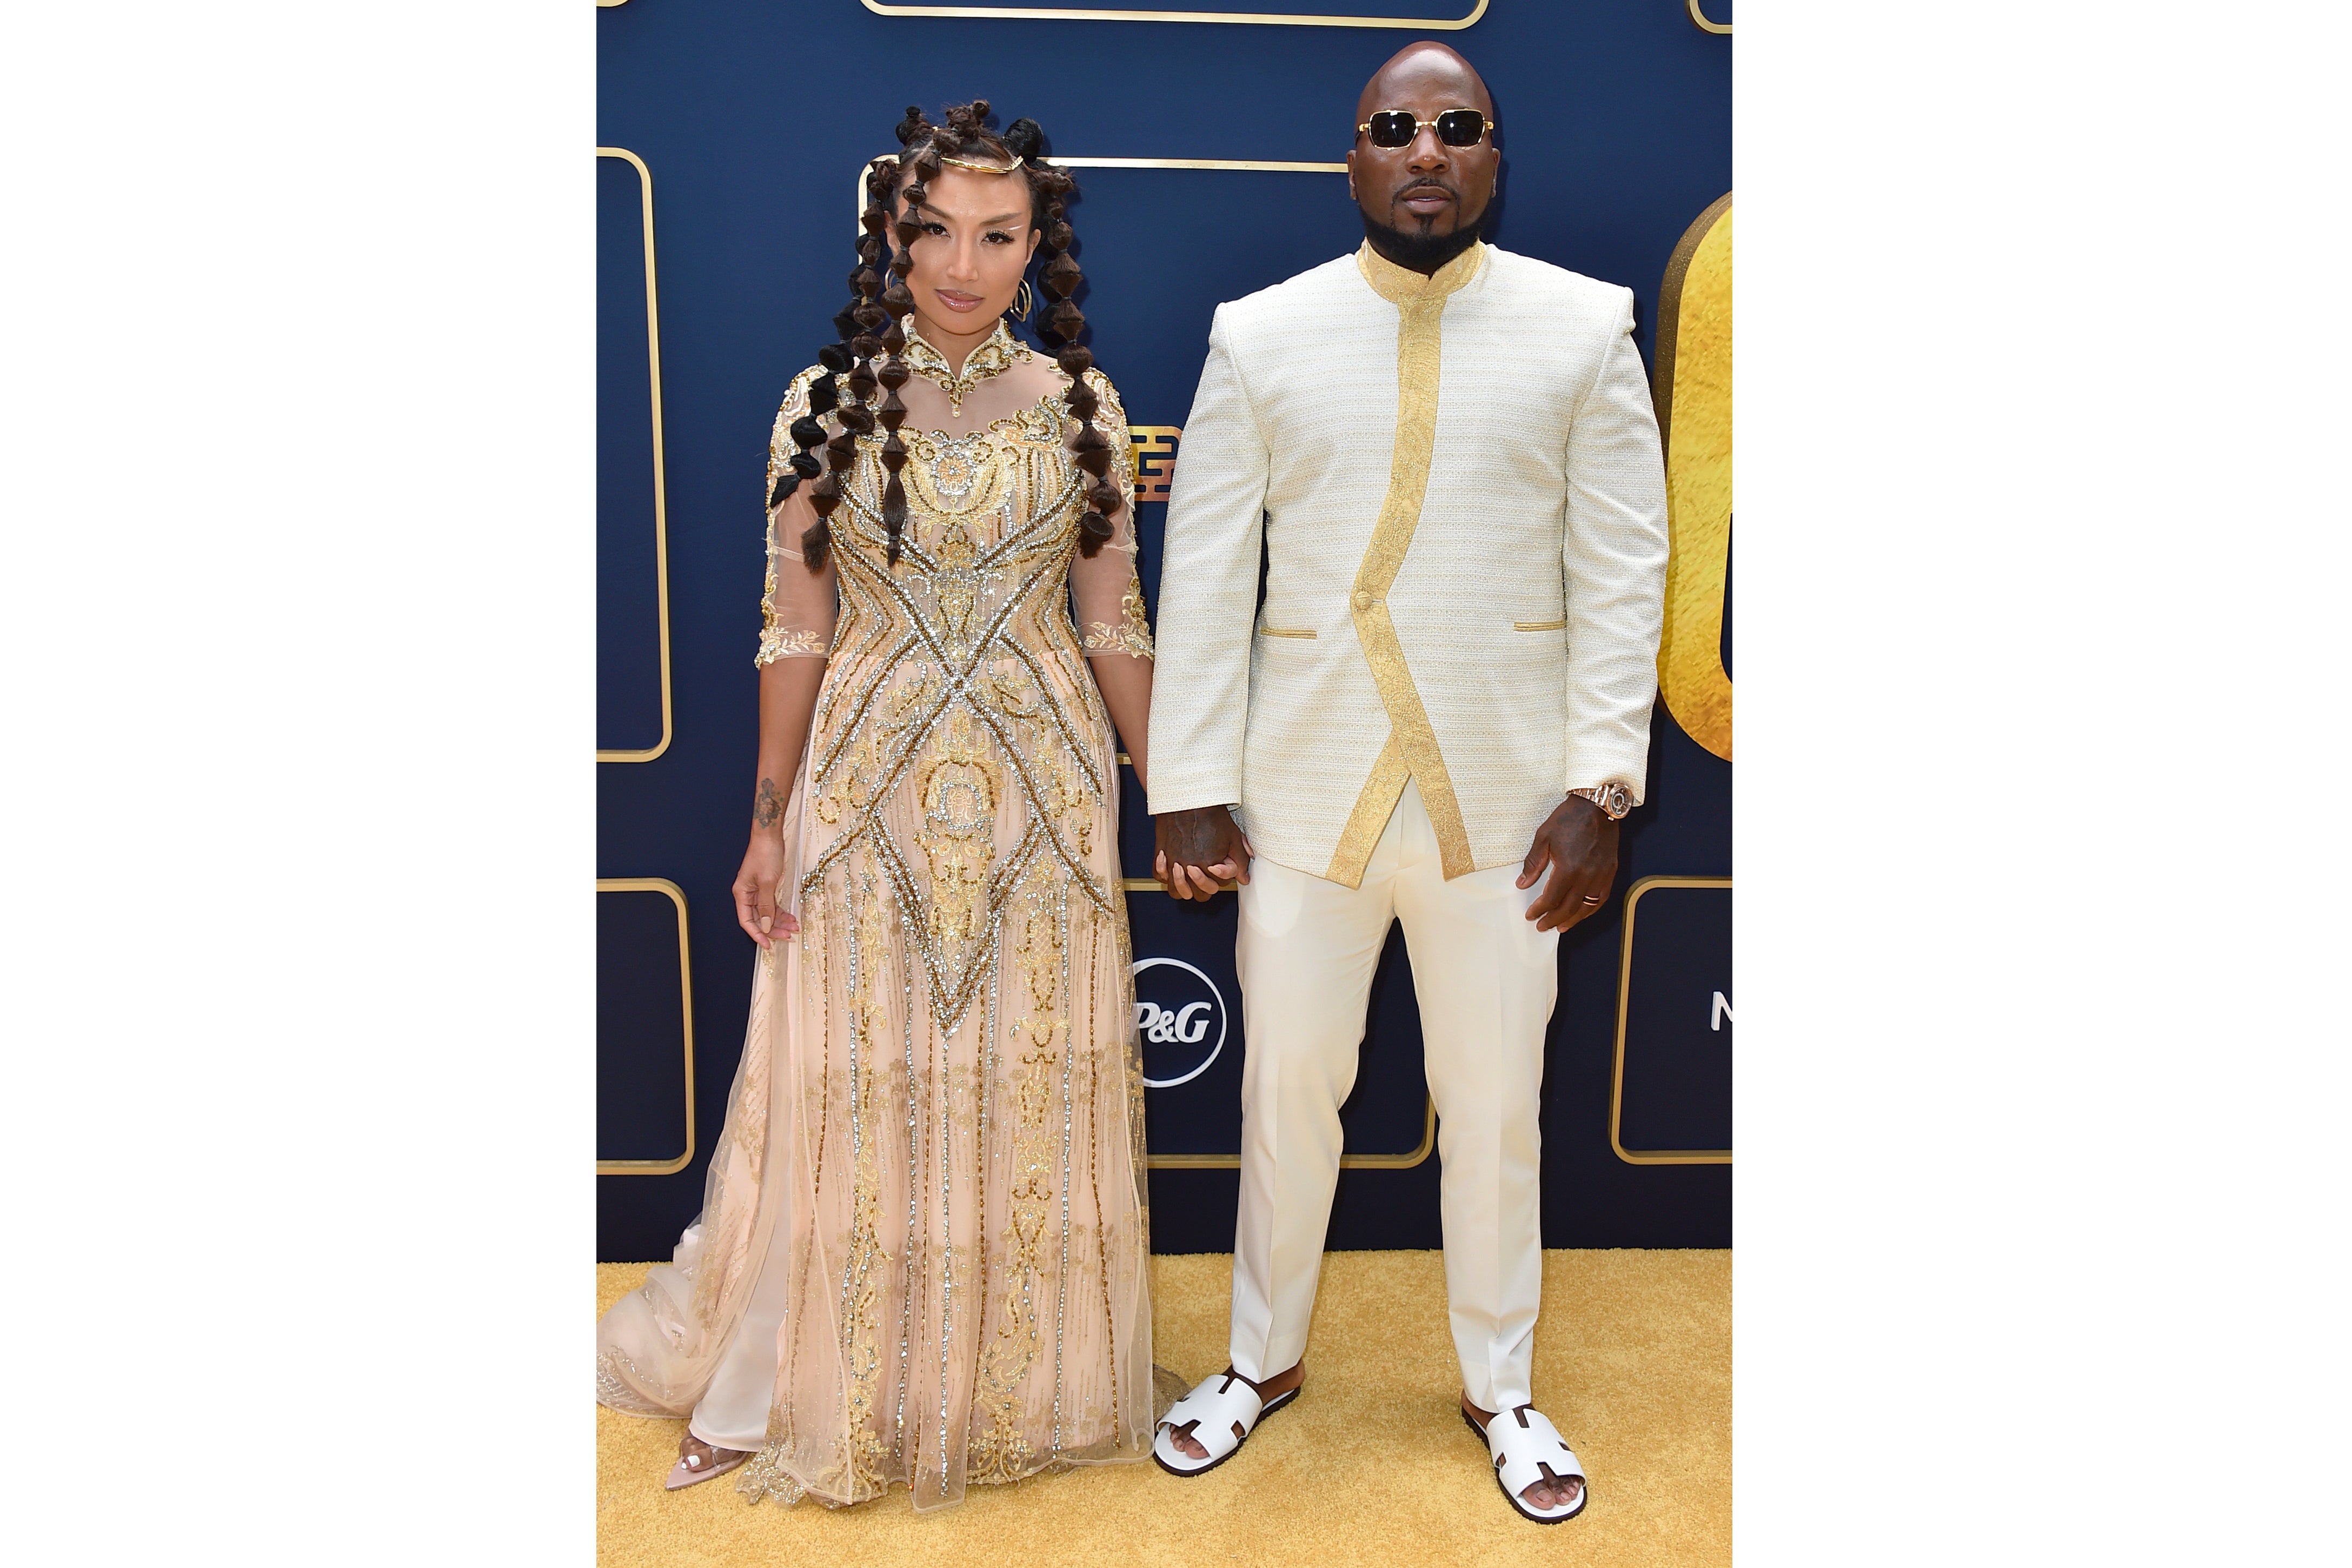 Jeezy files for divorce from Jeannie Mai after 2 years of marriage ...